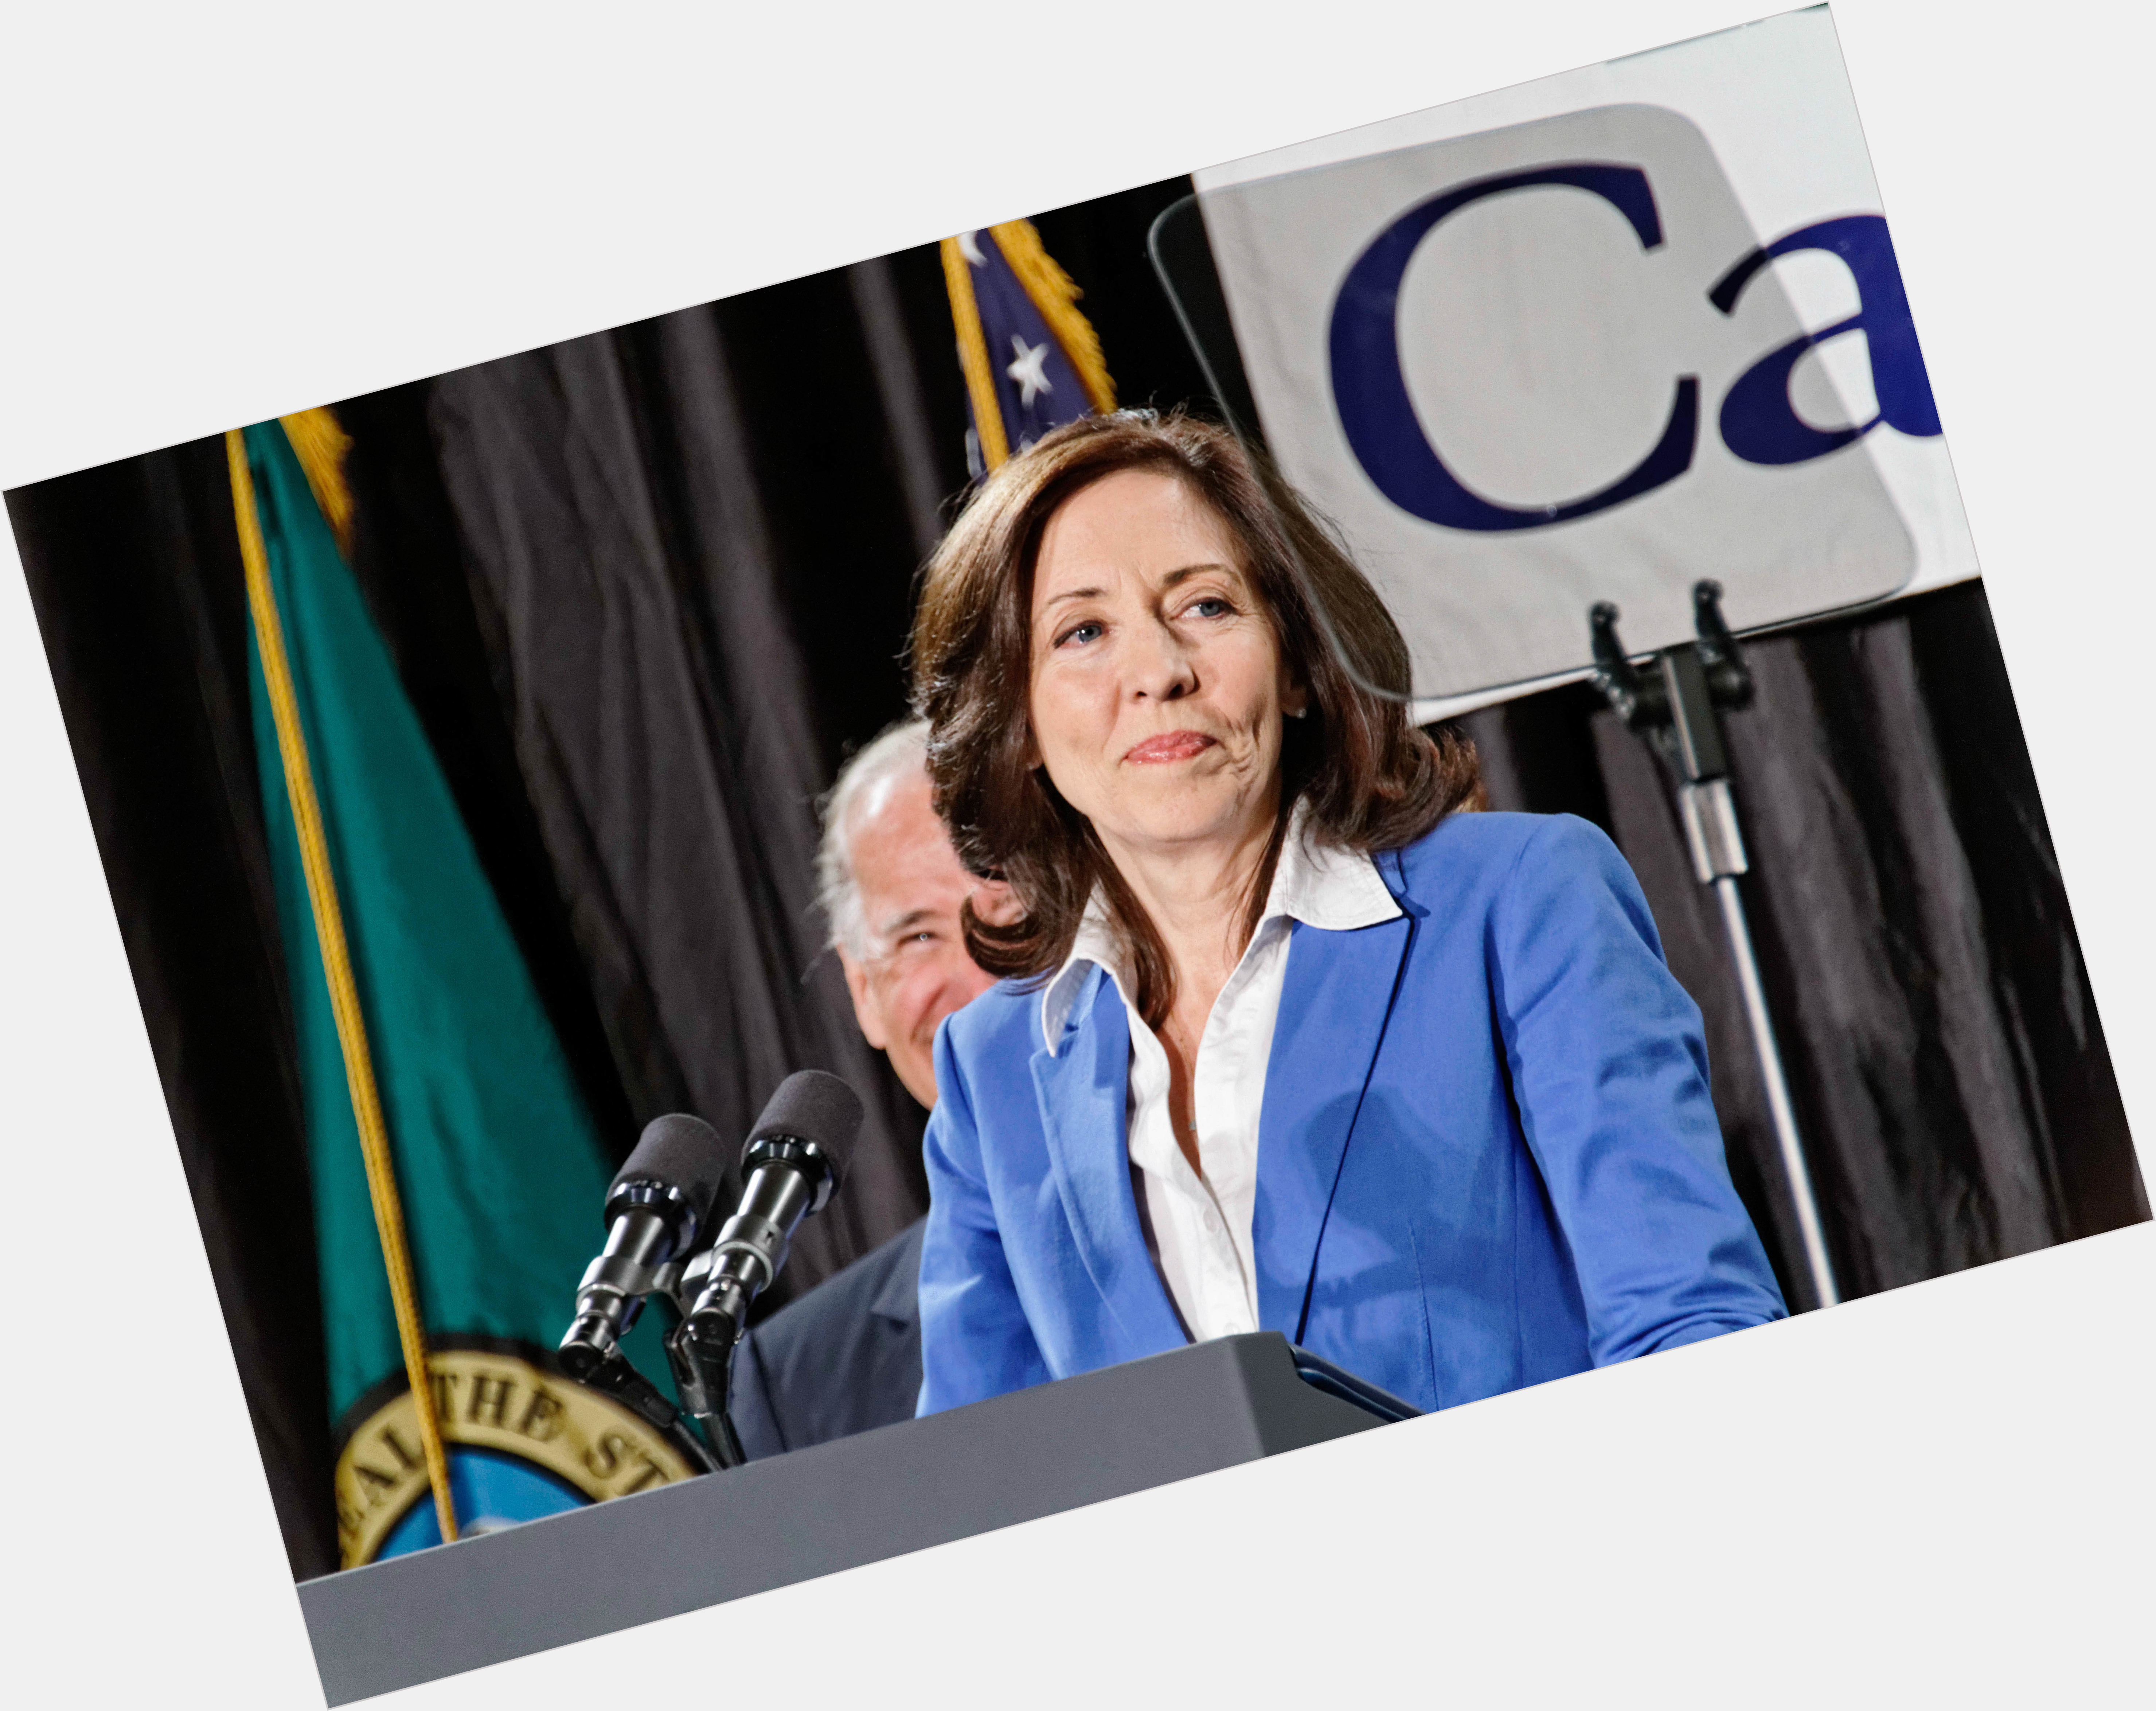 Https://fanpagepress.net/m/W/where Is Maria Cantwell 4